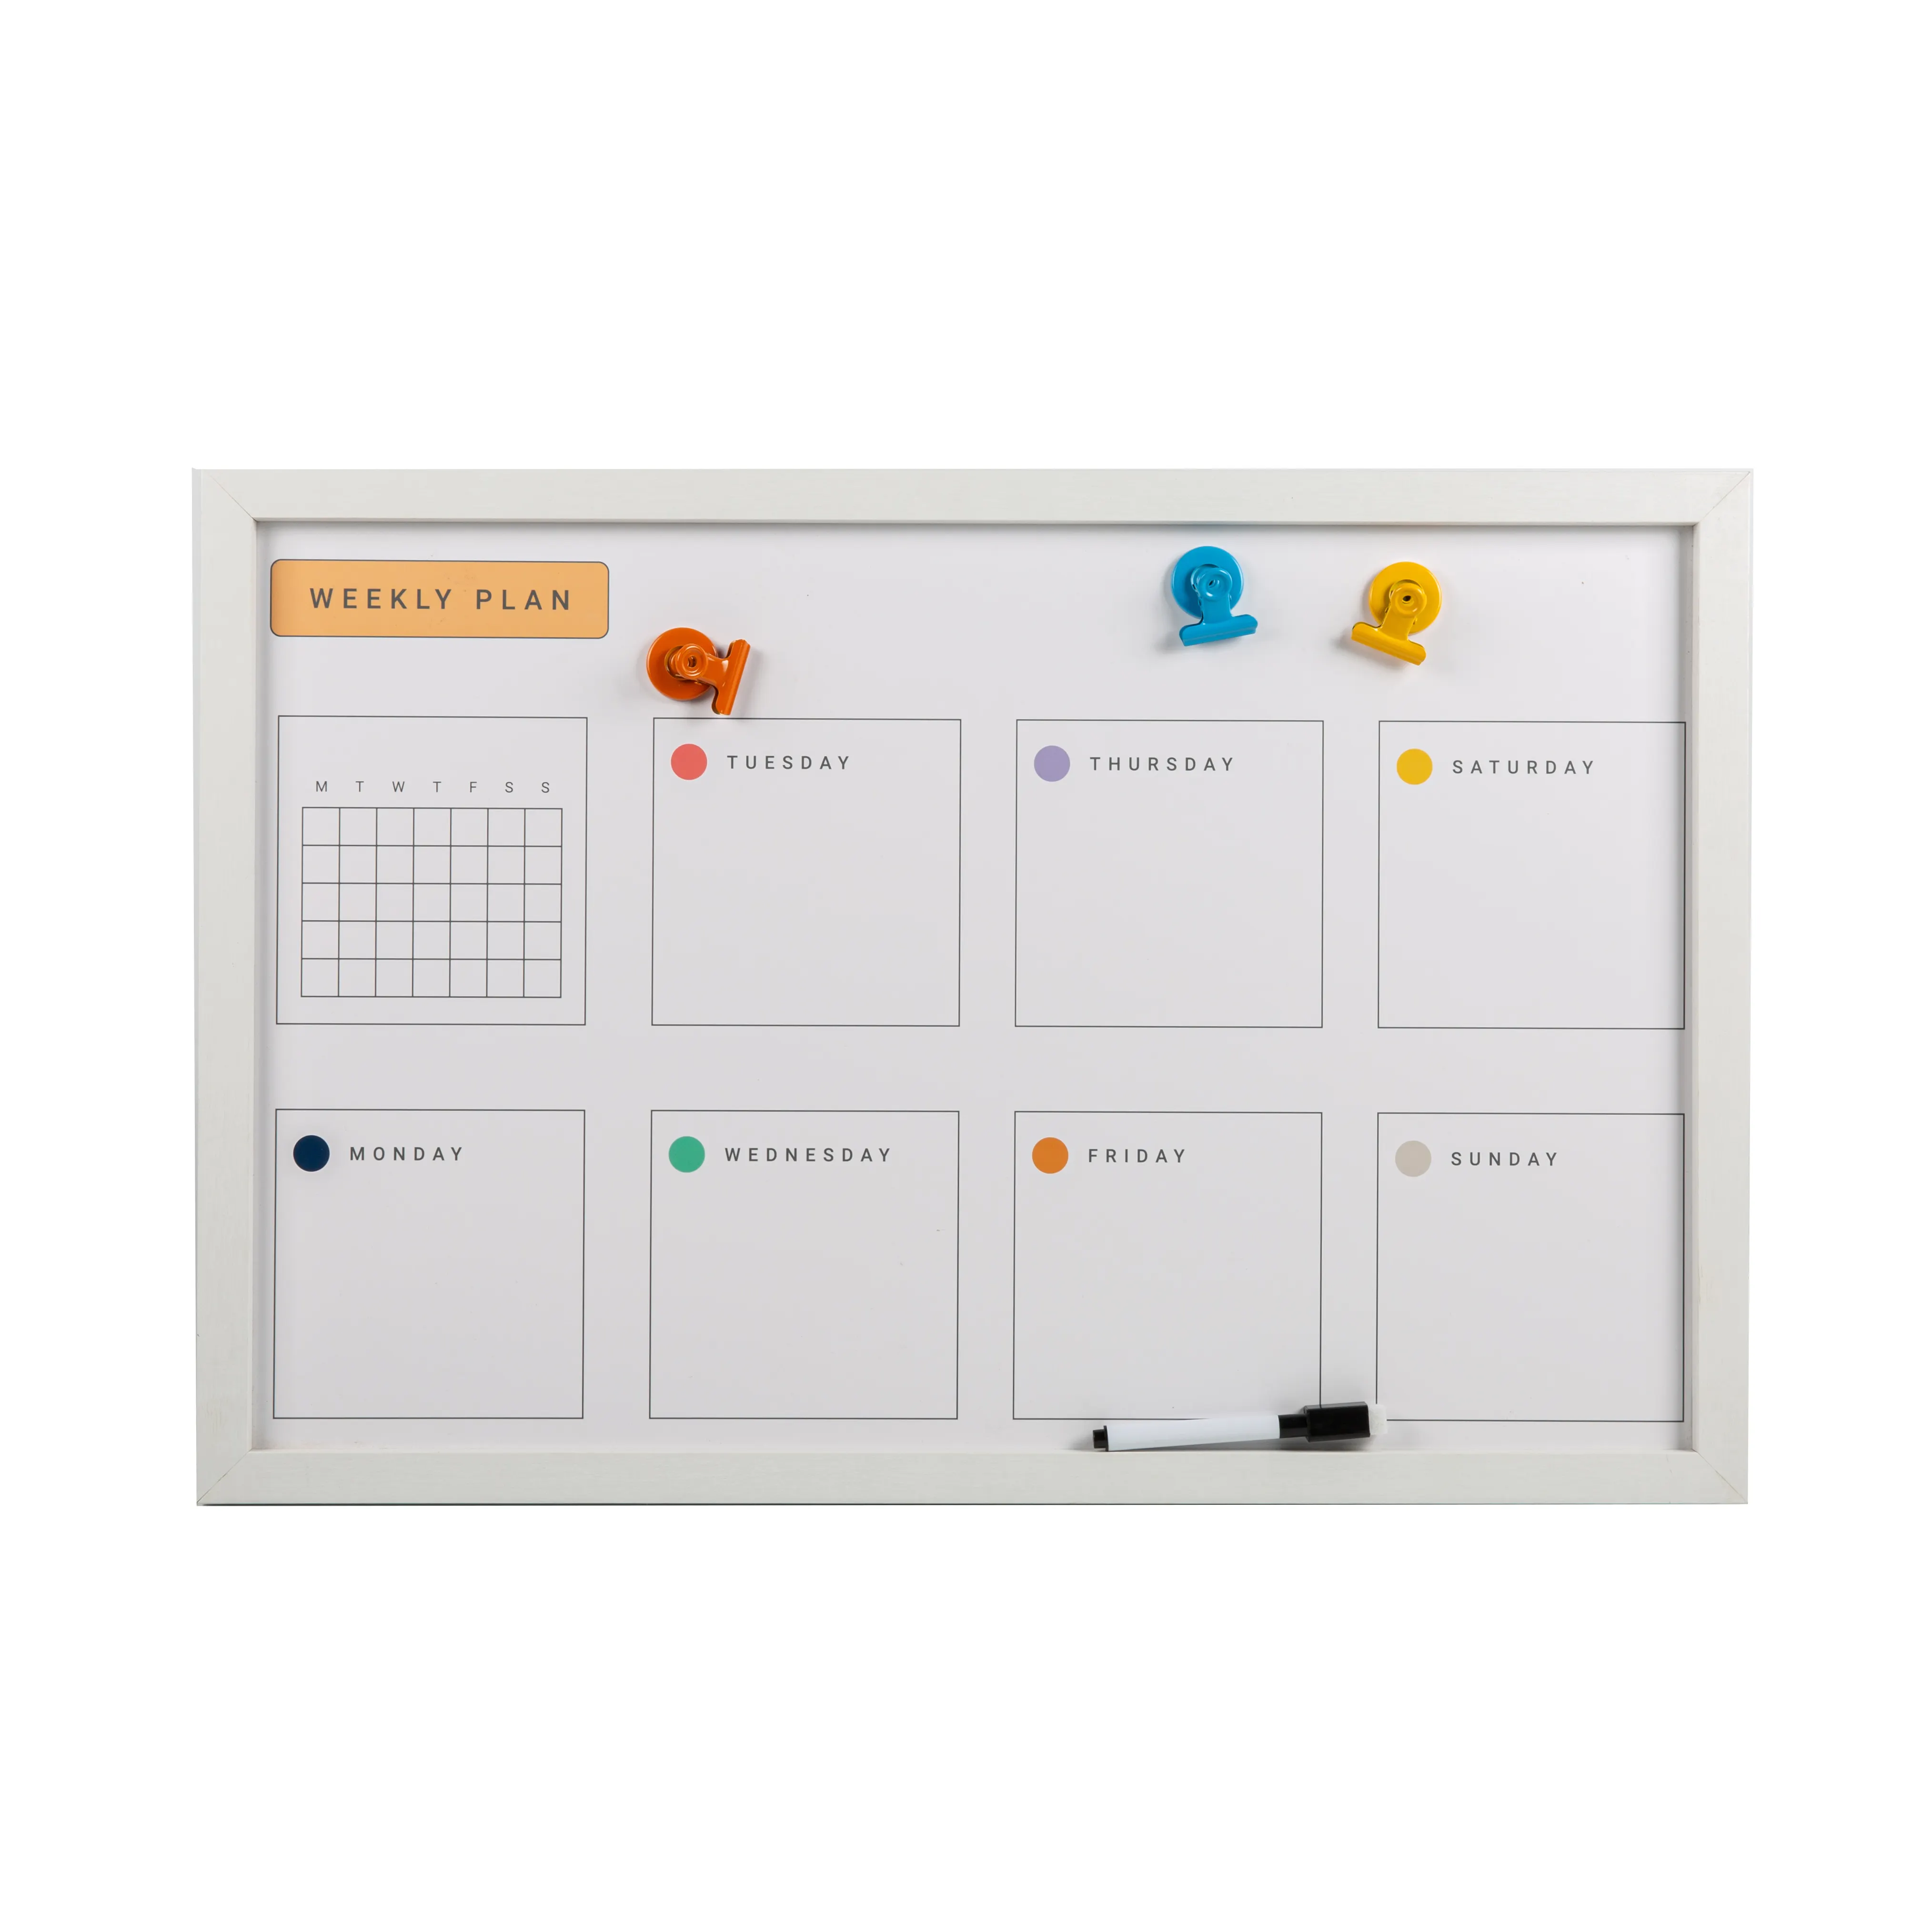 Home Office School Wall Mounted Dry Cleaning Board Weekly Plan Children's Whiteboard With Pen And Clips